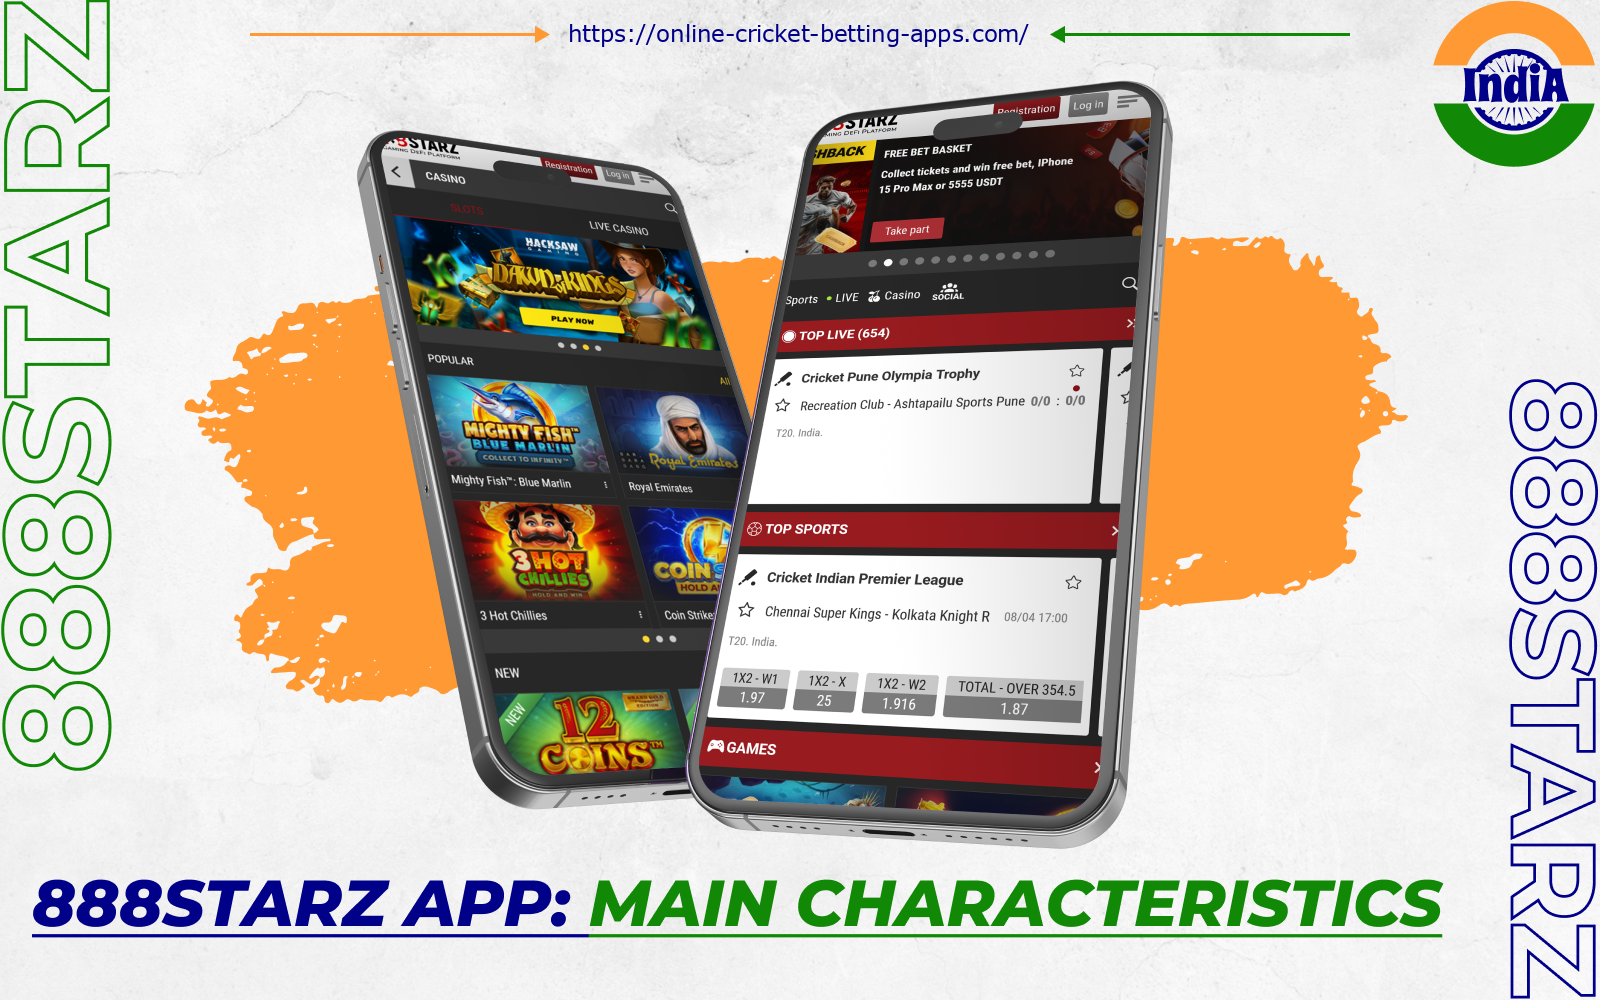 The 888starz mobile app has low system requirements but still gives players from India full access to all features